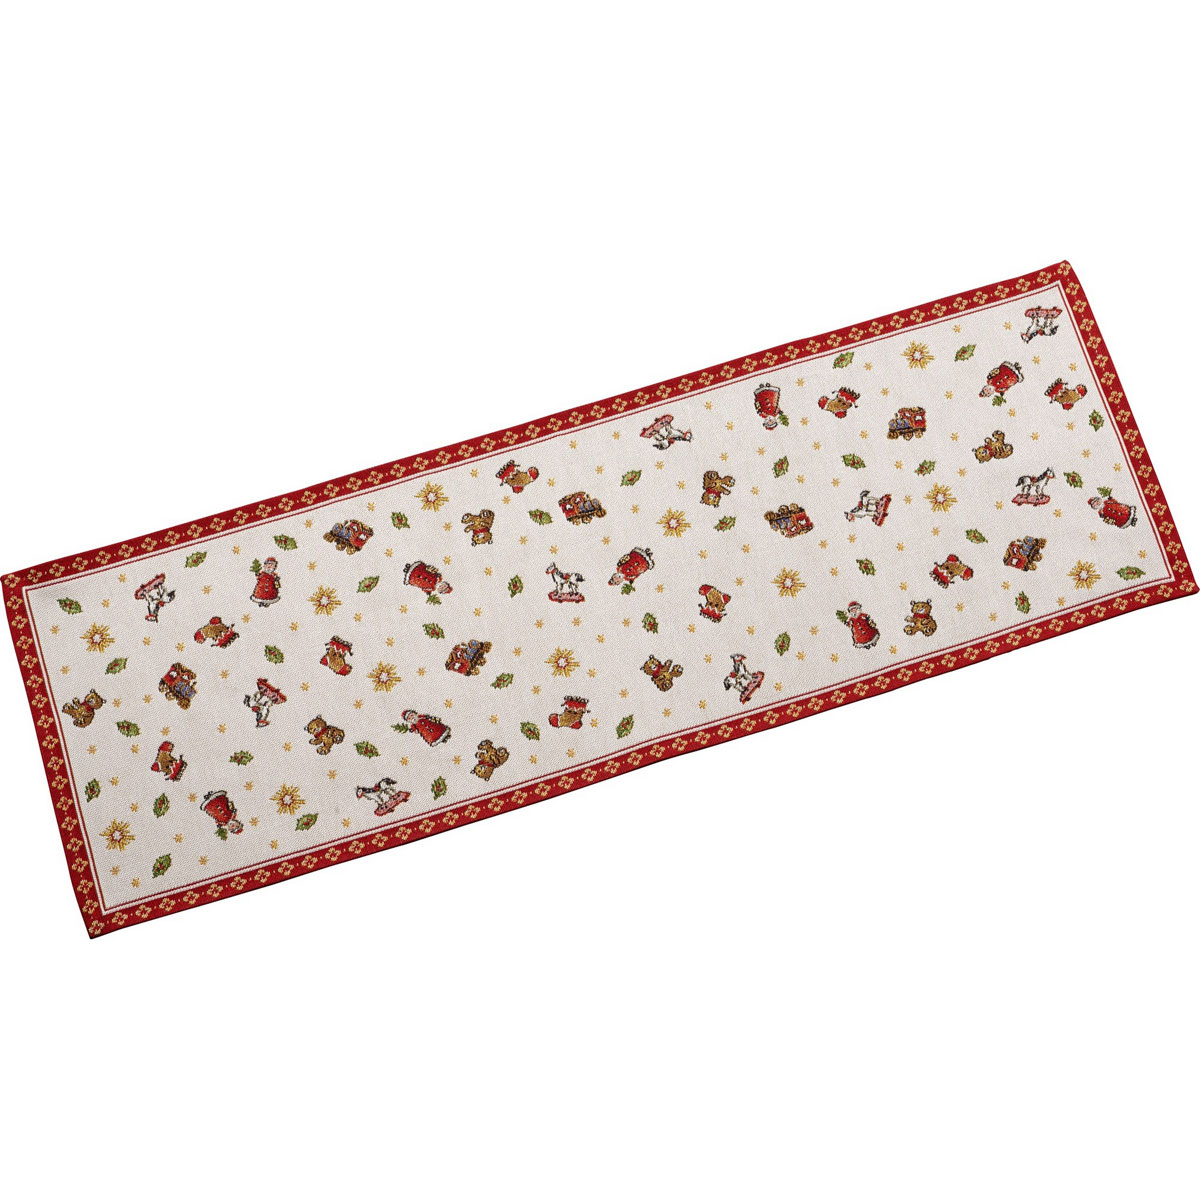 Villeroy and Boch Toys Delight Large Embroidered Runner